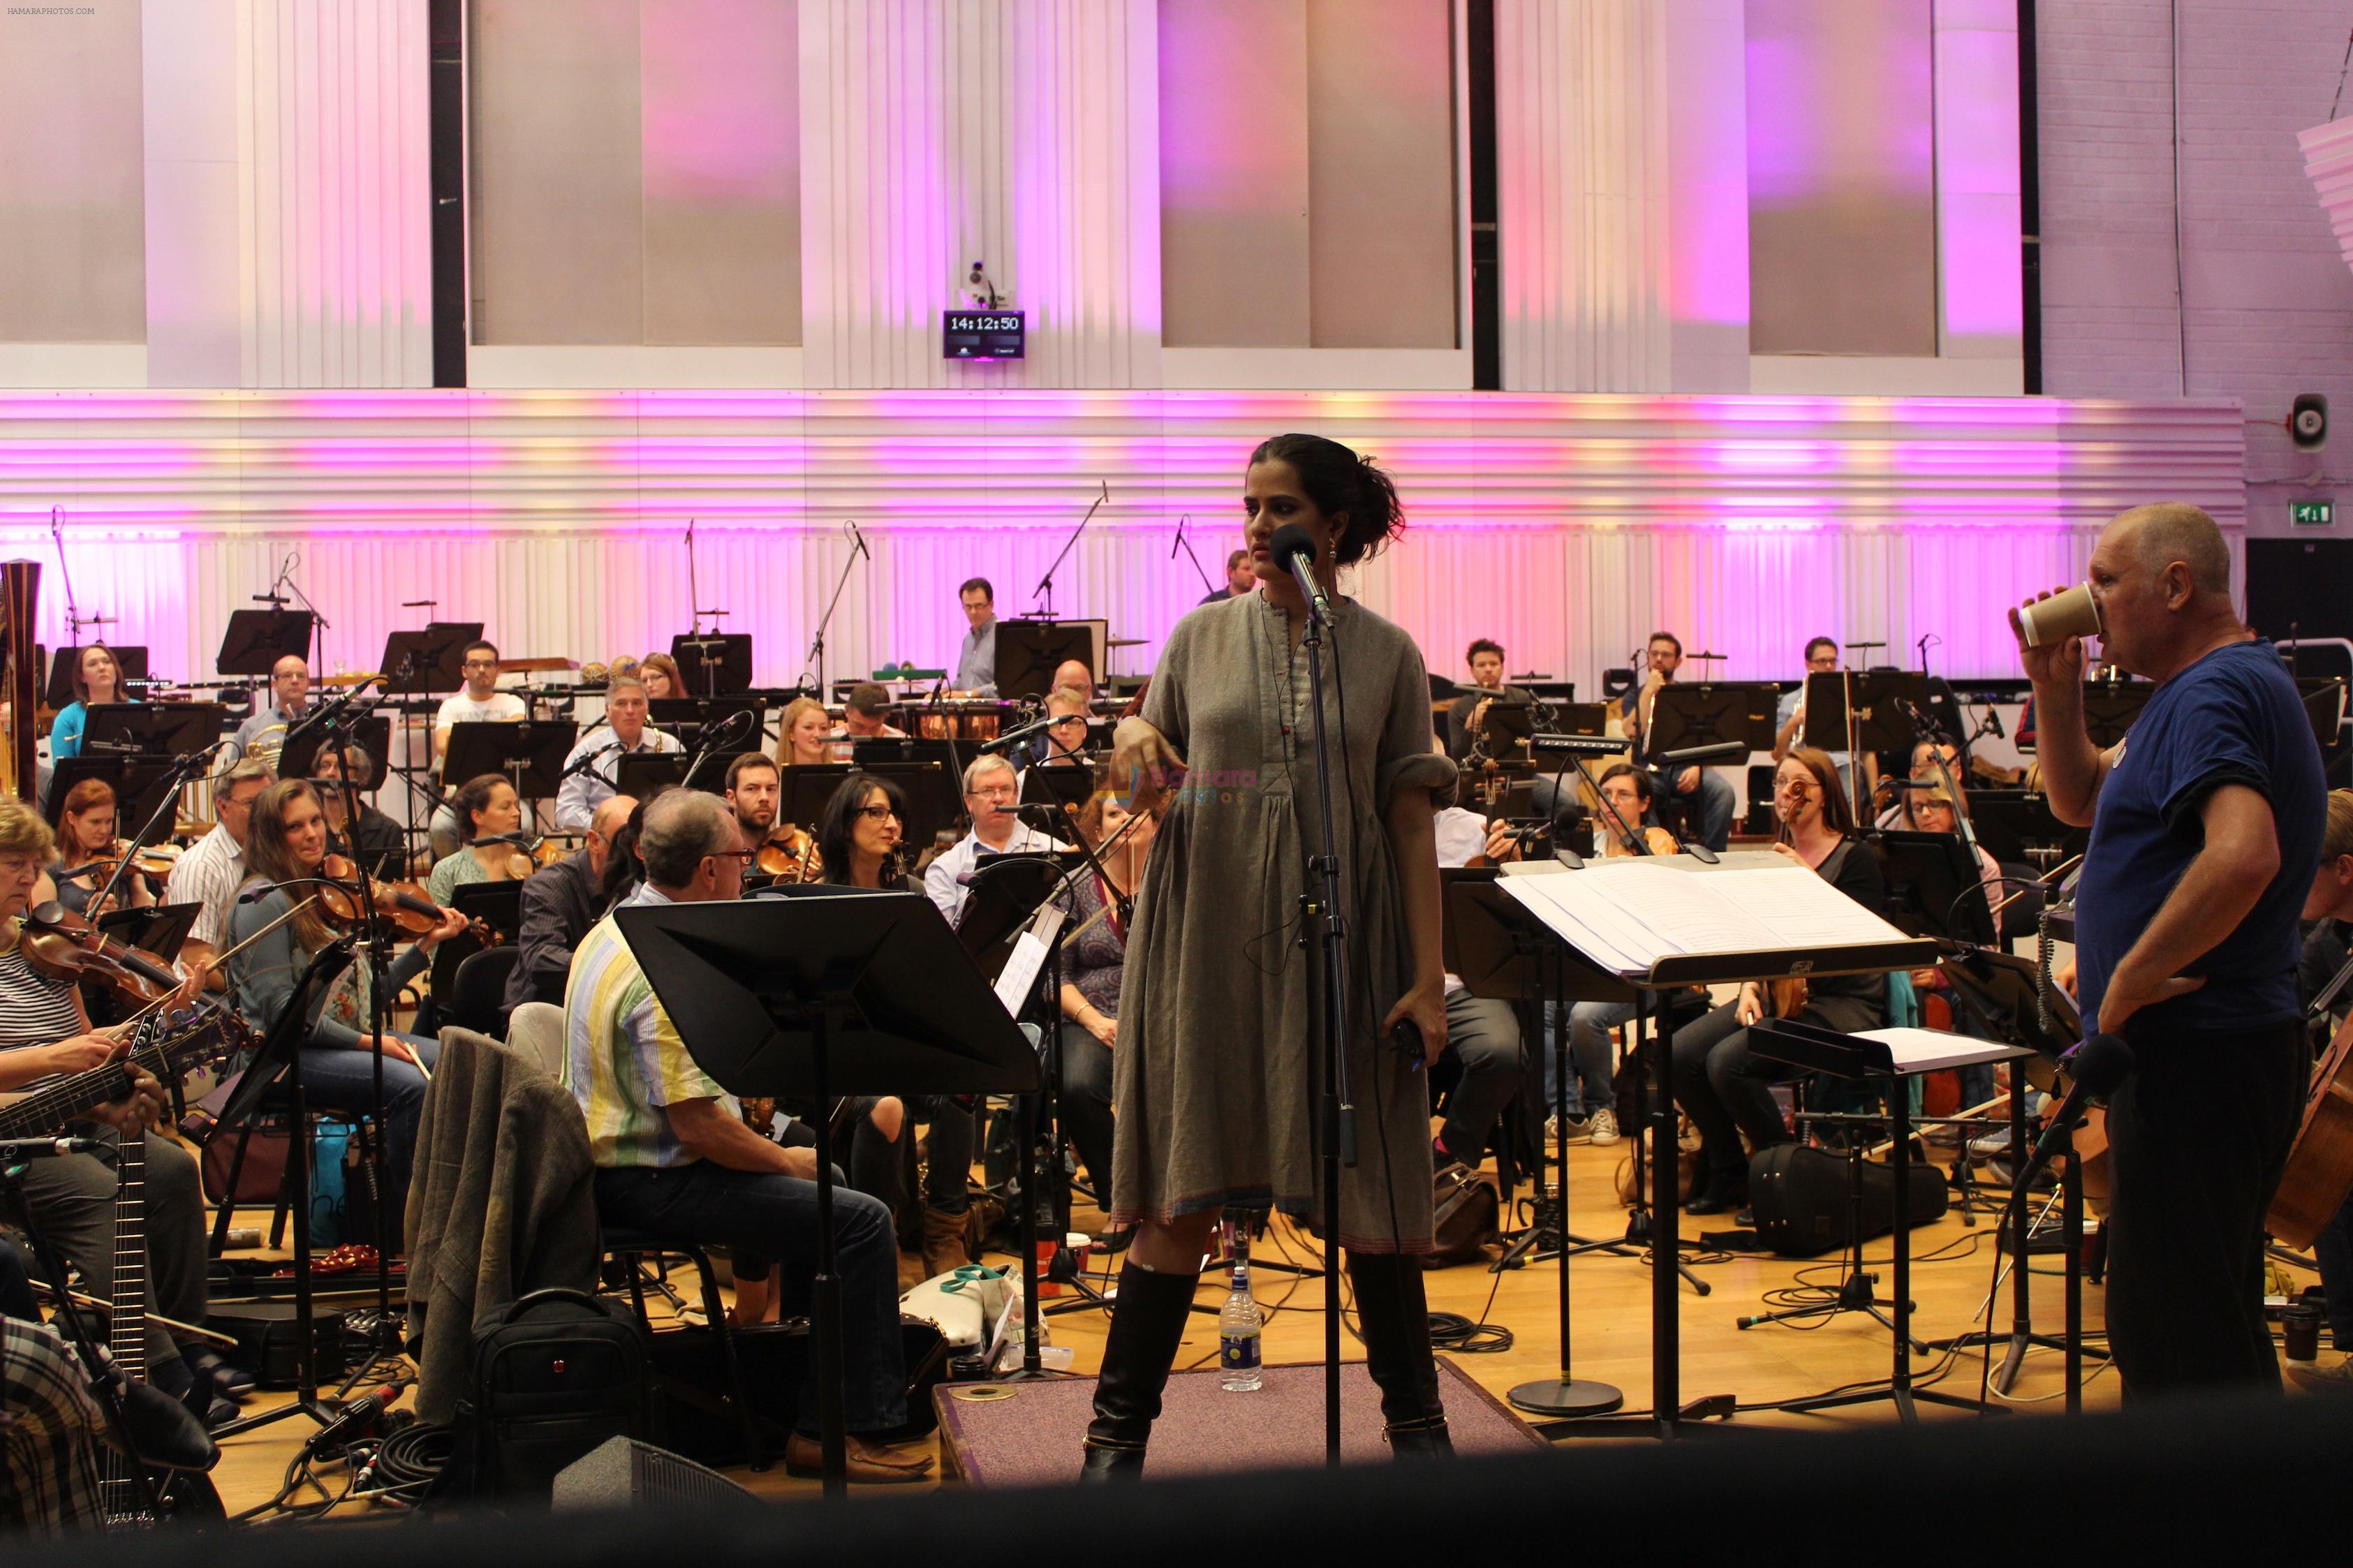 Sona Mohapatra final performance with BBC Philharmonic on 14th Sept 2014